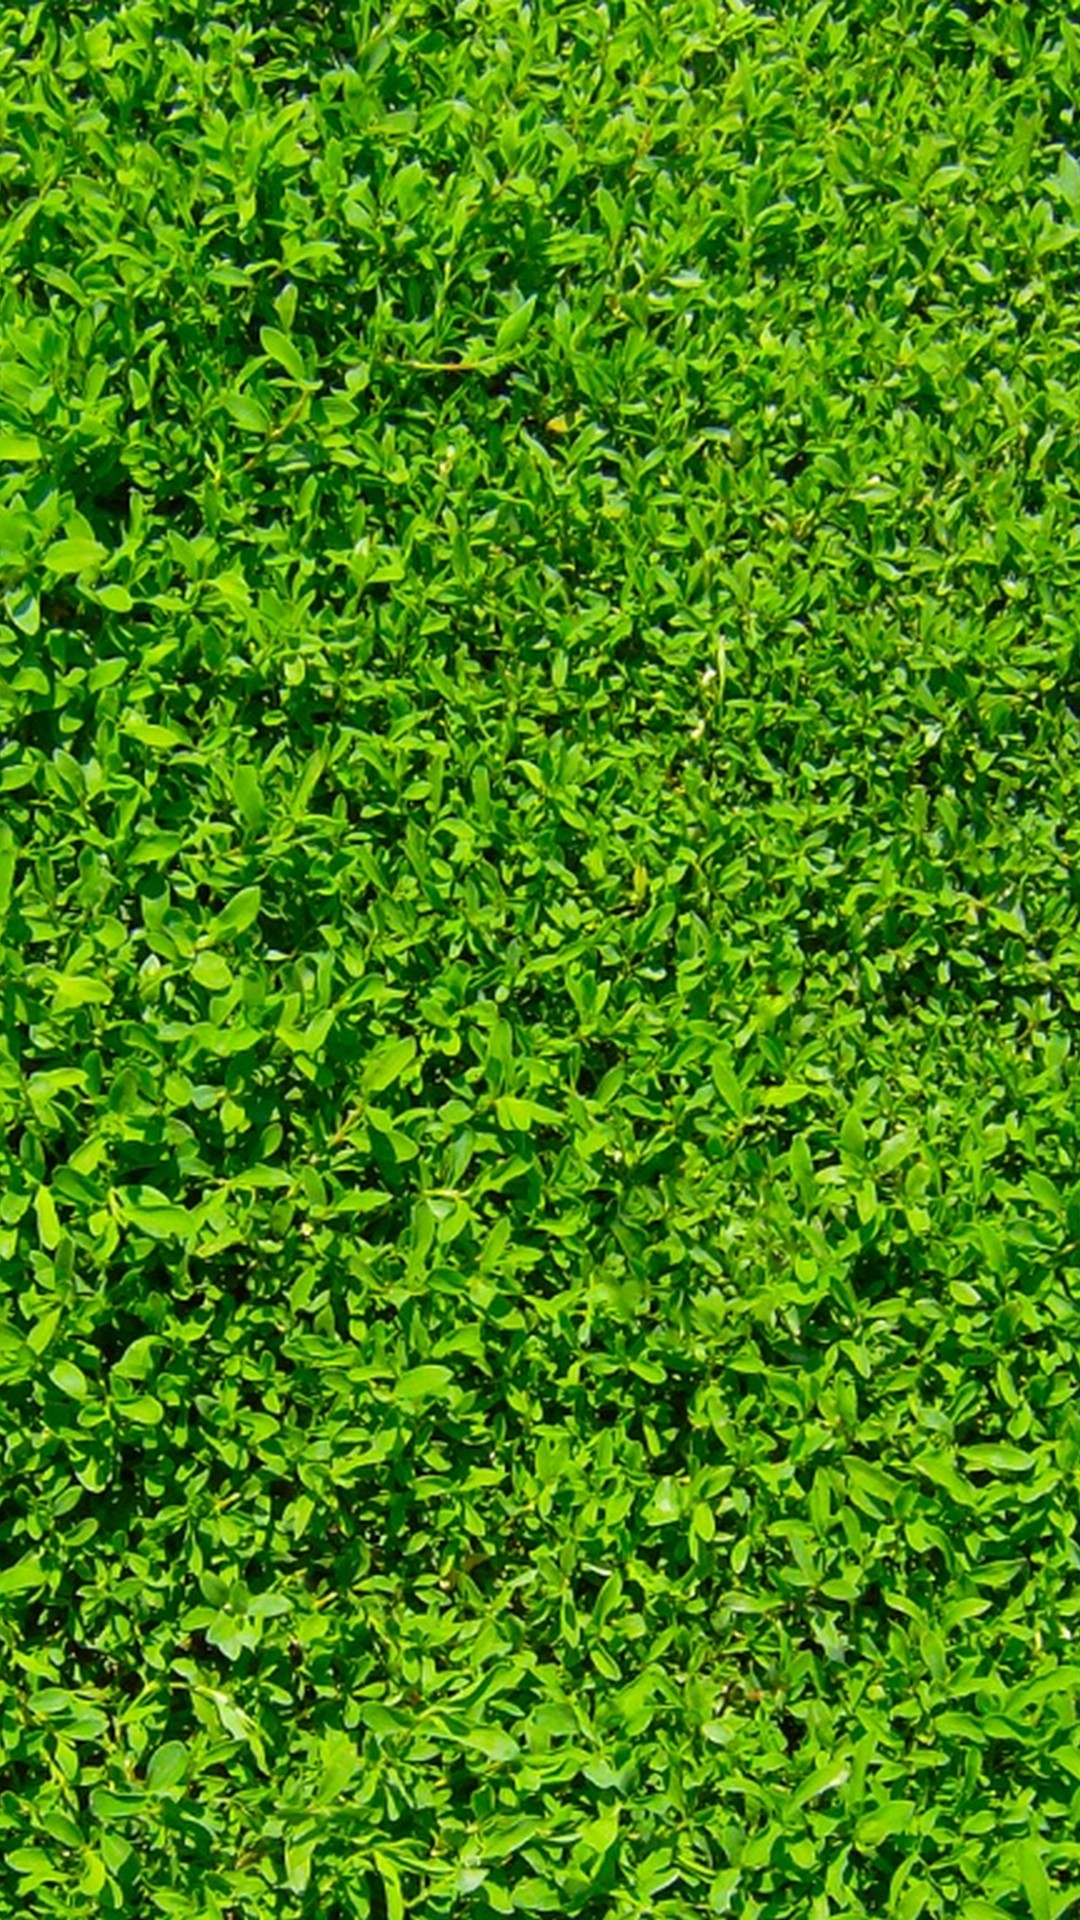 iPhone Wallpaper Nature Green with image resolution 1080x1920 pixel. You can make this wallpaper for your iPhone 5, 6, 7, 8, X backgrounds, Mobile Screensaver, or iPad Lock Screen